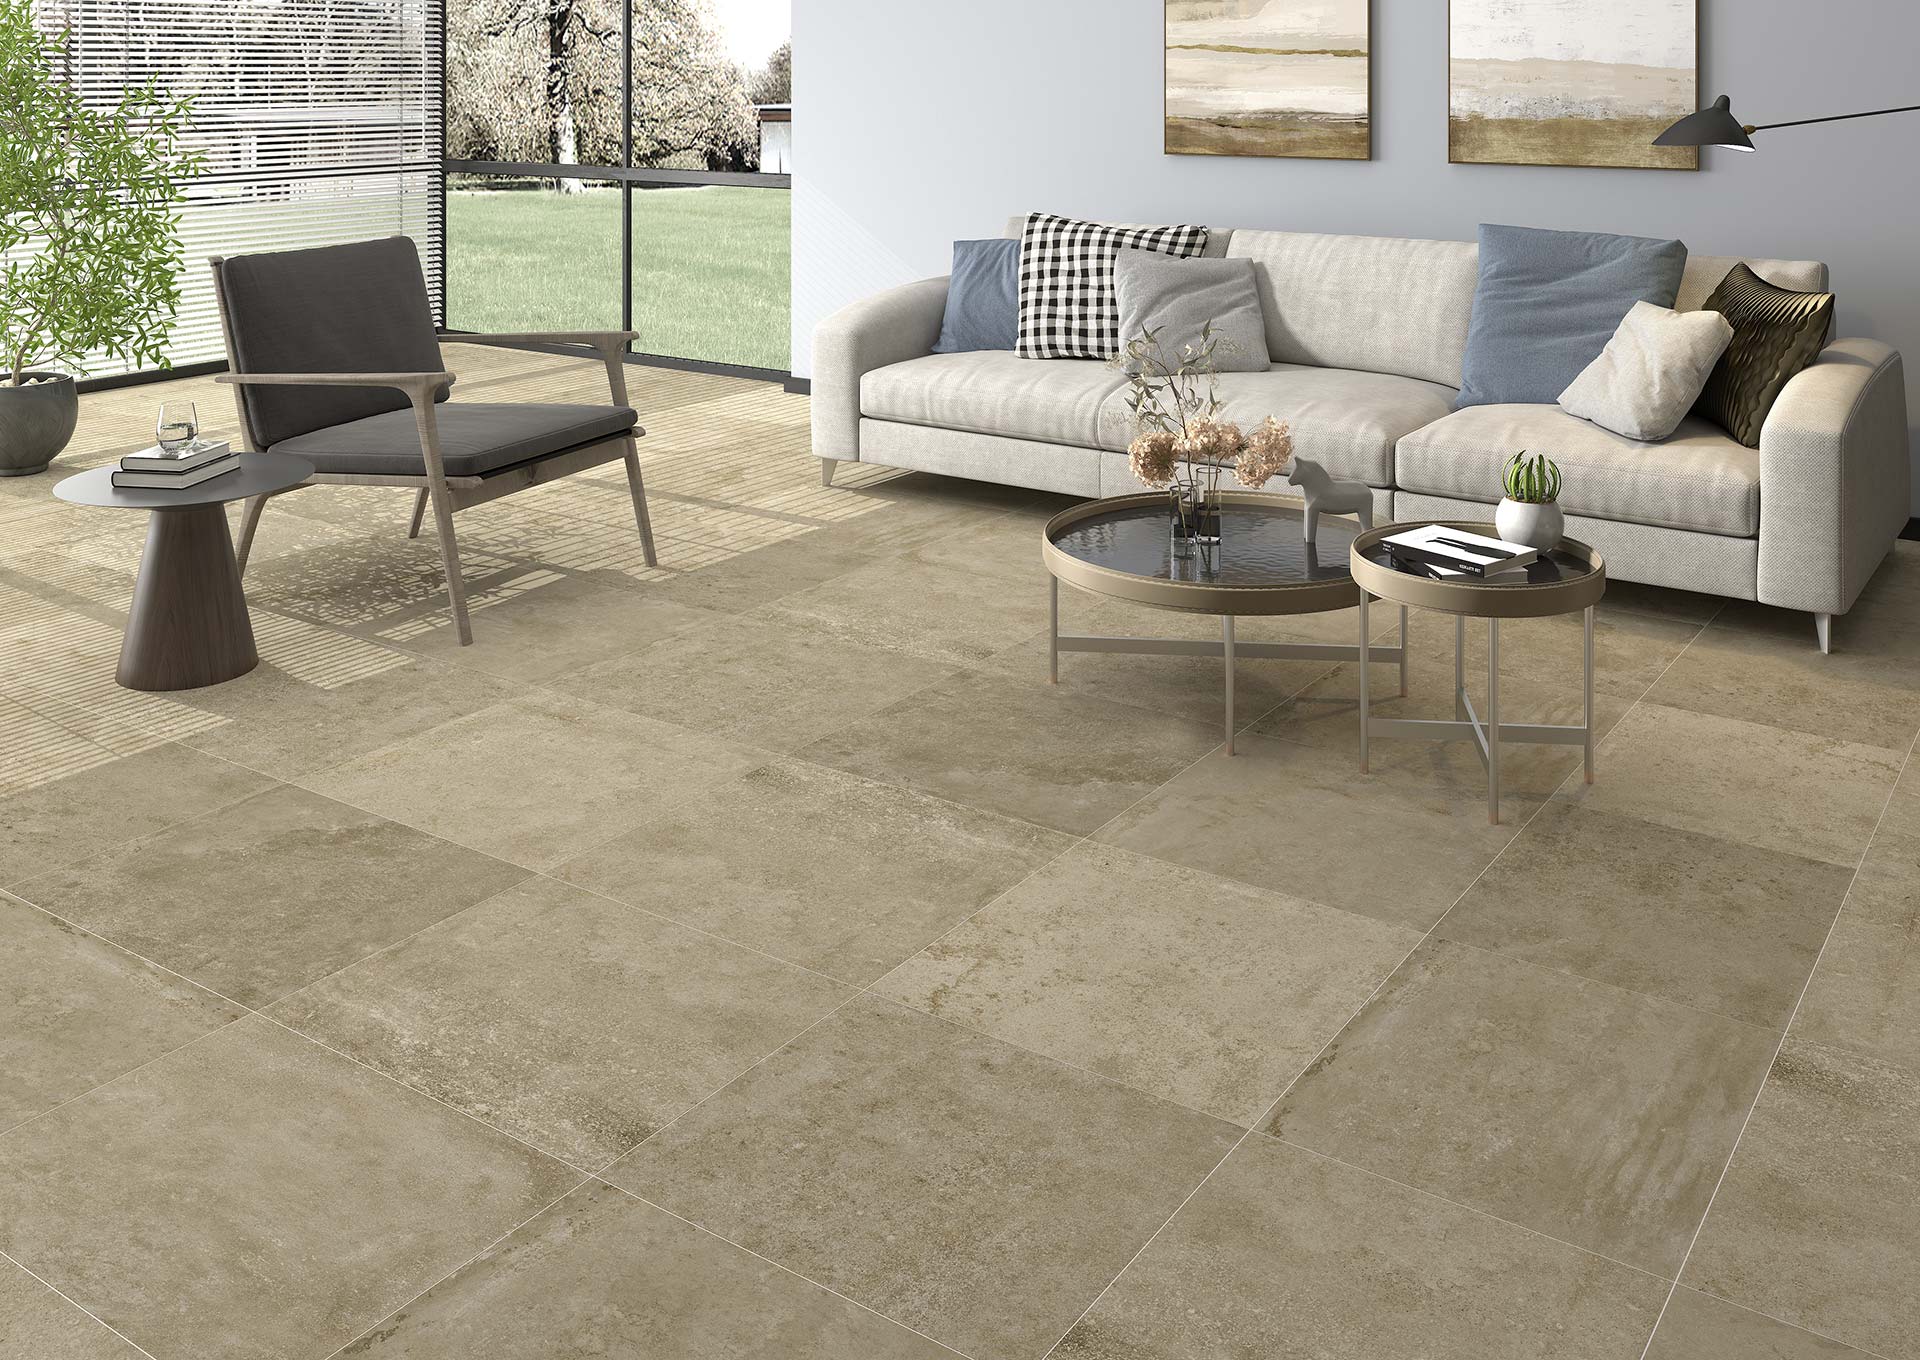 Trail taupe 60x60 porcelain gres